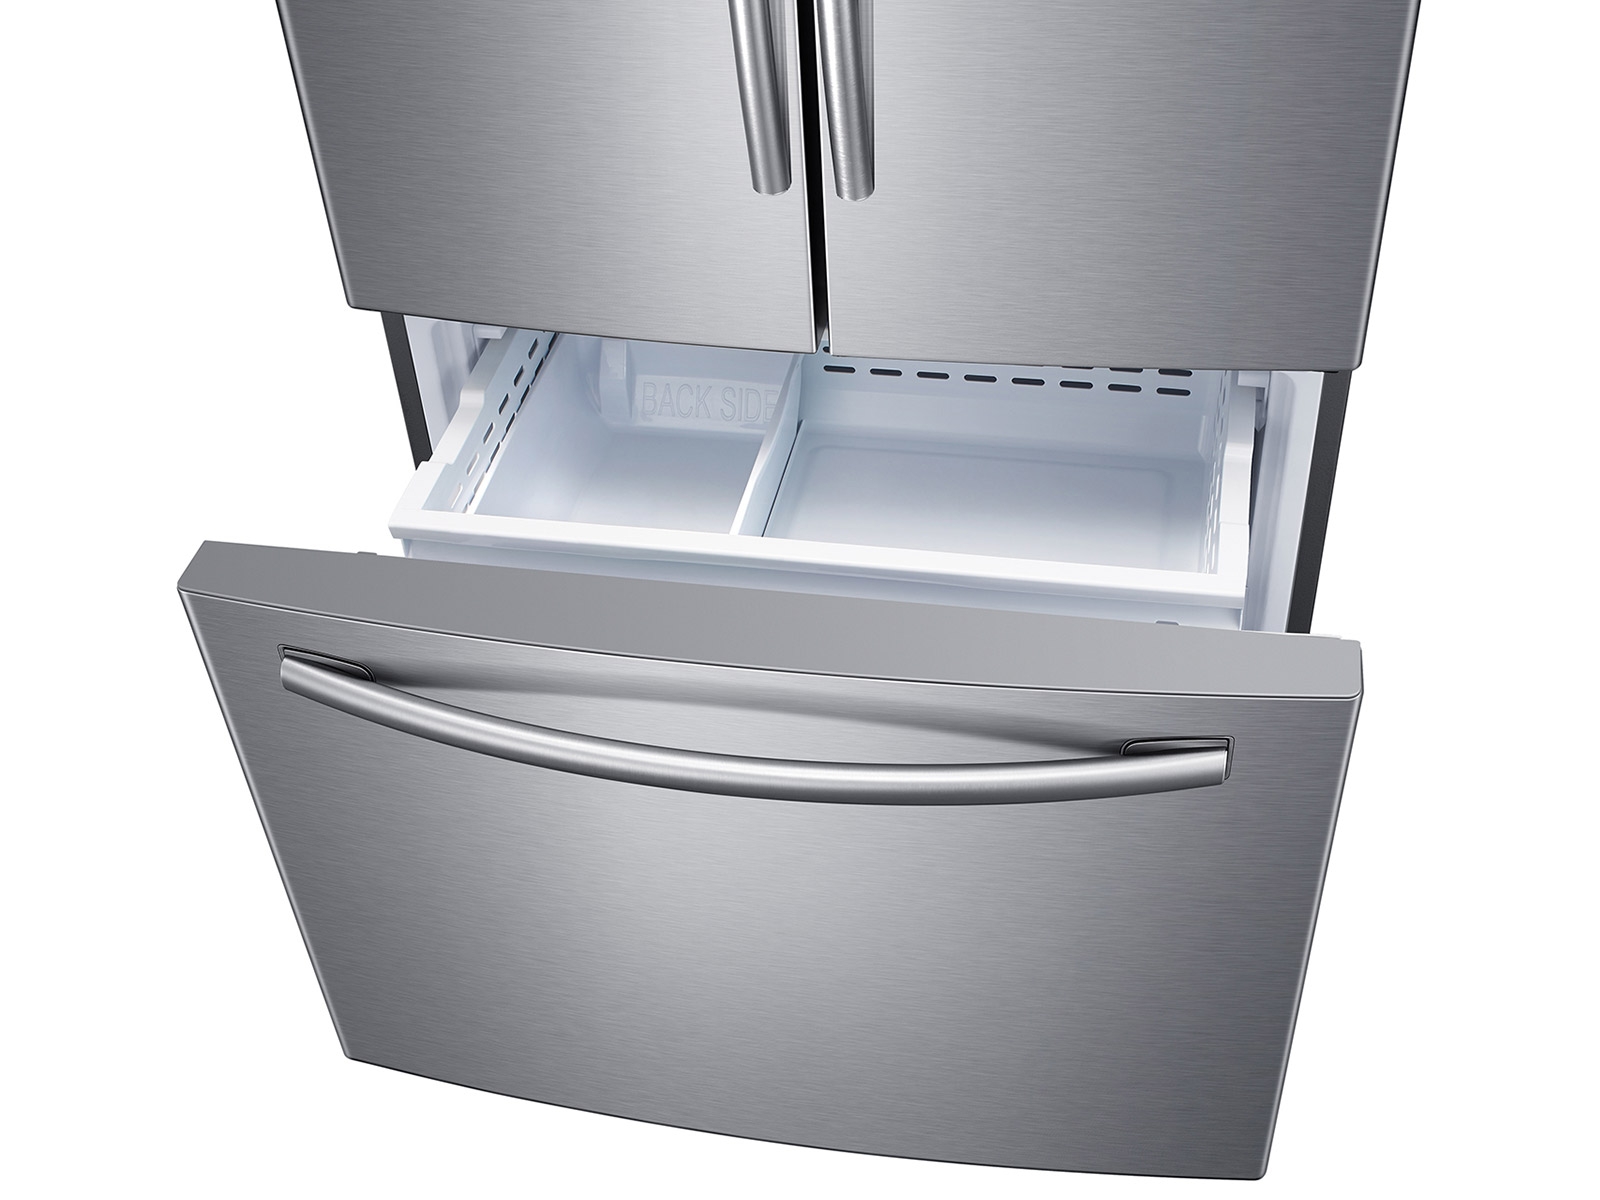 How to Remove Freezer Drawer on Whirlpool French Door Refrigerator: Quick Guide